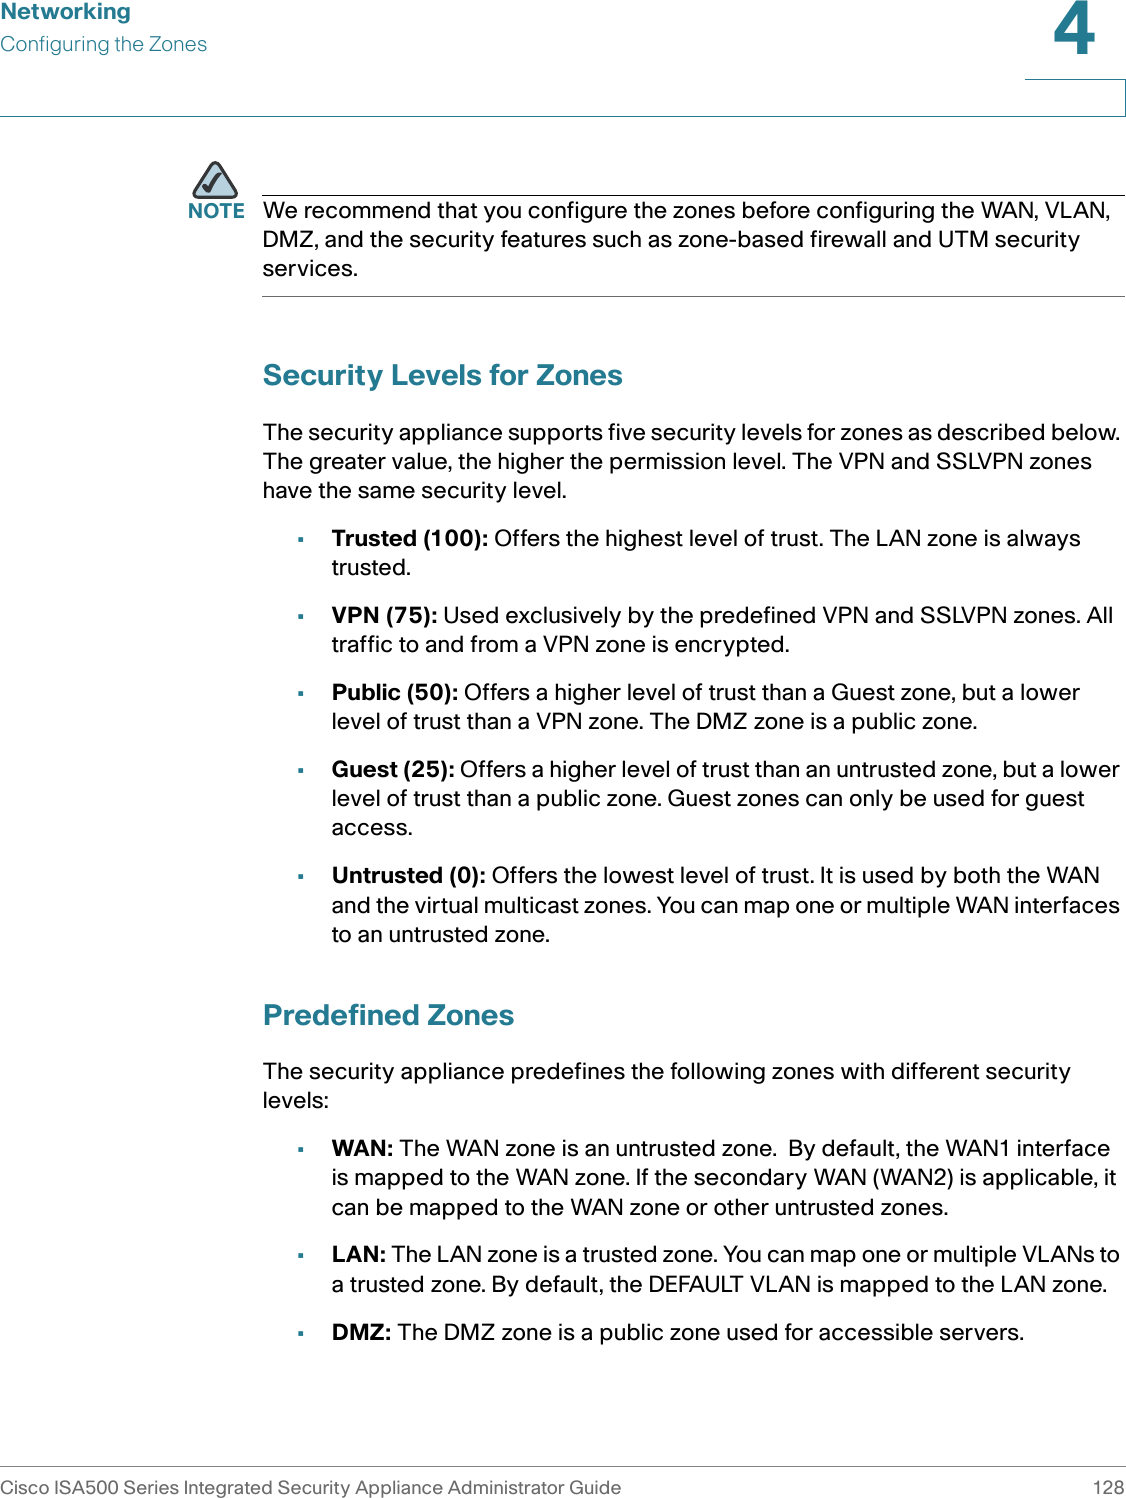 NetworkingConfiguring the ZonesCisco ISA500 Series Integrated Security Appliance Administrator Guide 1284 NOTE We recommend that you configure the zones before configuring the WAN, VLAN, DMZ, and the security features such as zone-based firewall and UTM security services.Security Levels for ZonesThe security appliance supports five security levels for zones as described below. The greater value, the higher the permission level. The VPN and SSLVPN zones have the same security level. •Trusted (100): Offers the highest level of trust. The LAN zone is always trusted. •VPN (75): Used exclusively by the predefined VPN and SSLVPN zones. All traffic to and from a VPN zone is encrypted. •Public (50): Offers a higher level of trust than a Guest zone, but a lower level of trust than a VPN zone. The DMZ zone is a public zone. •Guest (25): Offers a higher level of trust than an untrusted zone, but a lower level of trust than a public zone. Guest zones can only be used for guest access. •Untrusted (0): Offers the lowest level of trust. It is used by both the WAN and the virtual multicast zones. You can map one or multiple WAN interfaces to an untrusted zone. Predefined ZonesThe security appliance predefines the following zones with different security levels: •WAN: The WAN zone is an untrusted zone.  By default, the WAN1 interface is mapped to the WAN zone. If the secondary WAN (WAN2) is applicable, it can be mapped to the WAN zone or other untrusted zones. •LAN: The LAN zone is a trusted zone. You can map one or multiple VLANs to a trusted zone. By default, the DEFAULT VLAN is mapped to the LAN zone. •DMZ: The DMZ zone is a public zone used for accessible servers. 